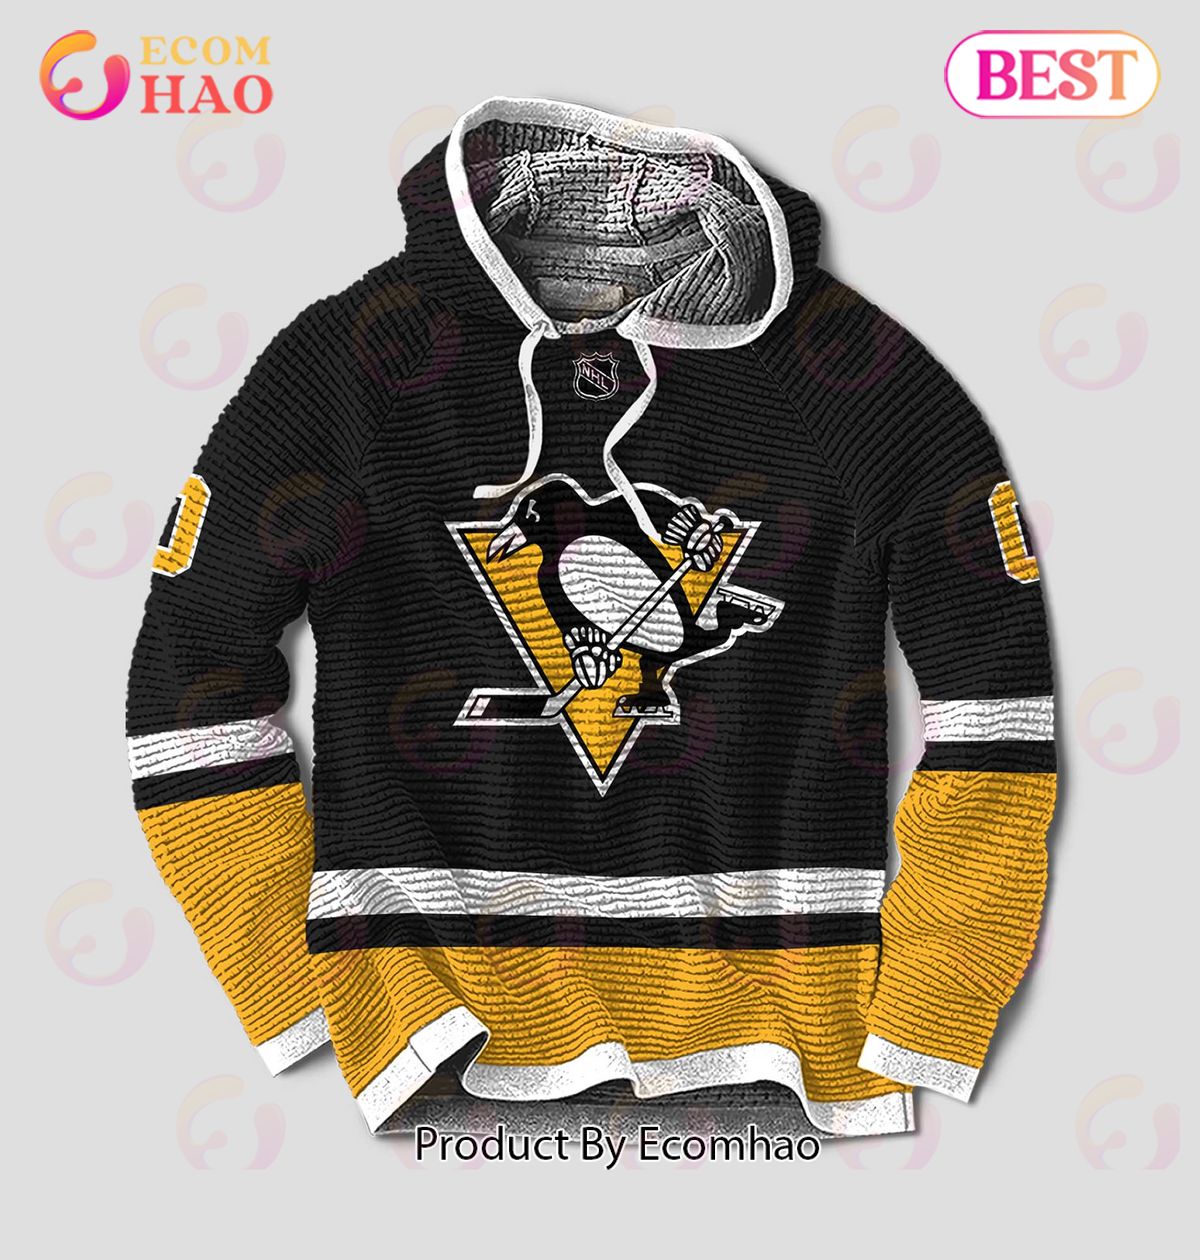 NHL Pittsburgh Penguins  Limited Edition Personalized 3D Hoodie Full Printing